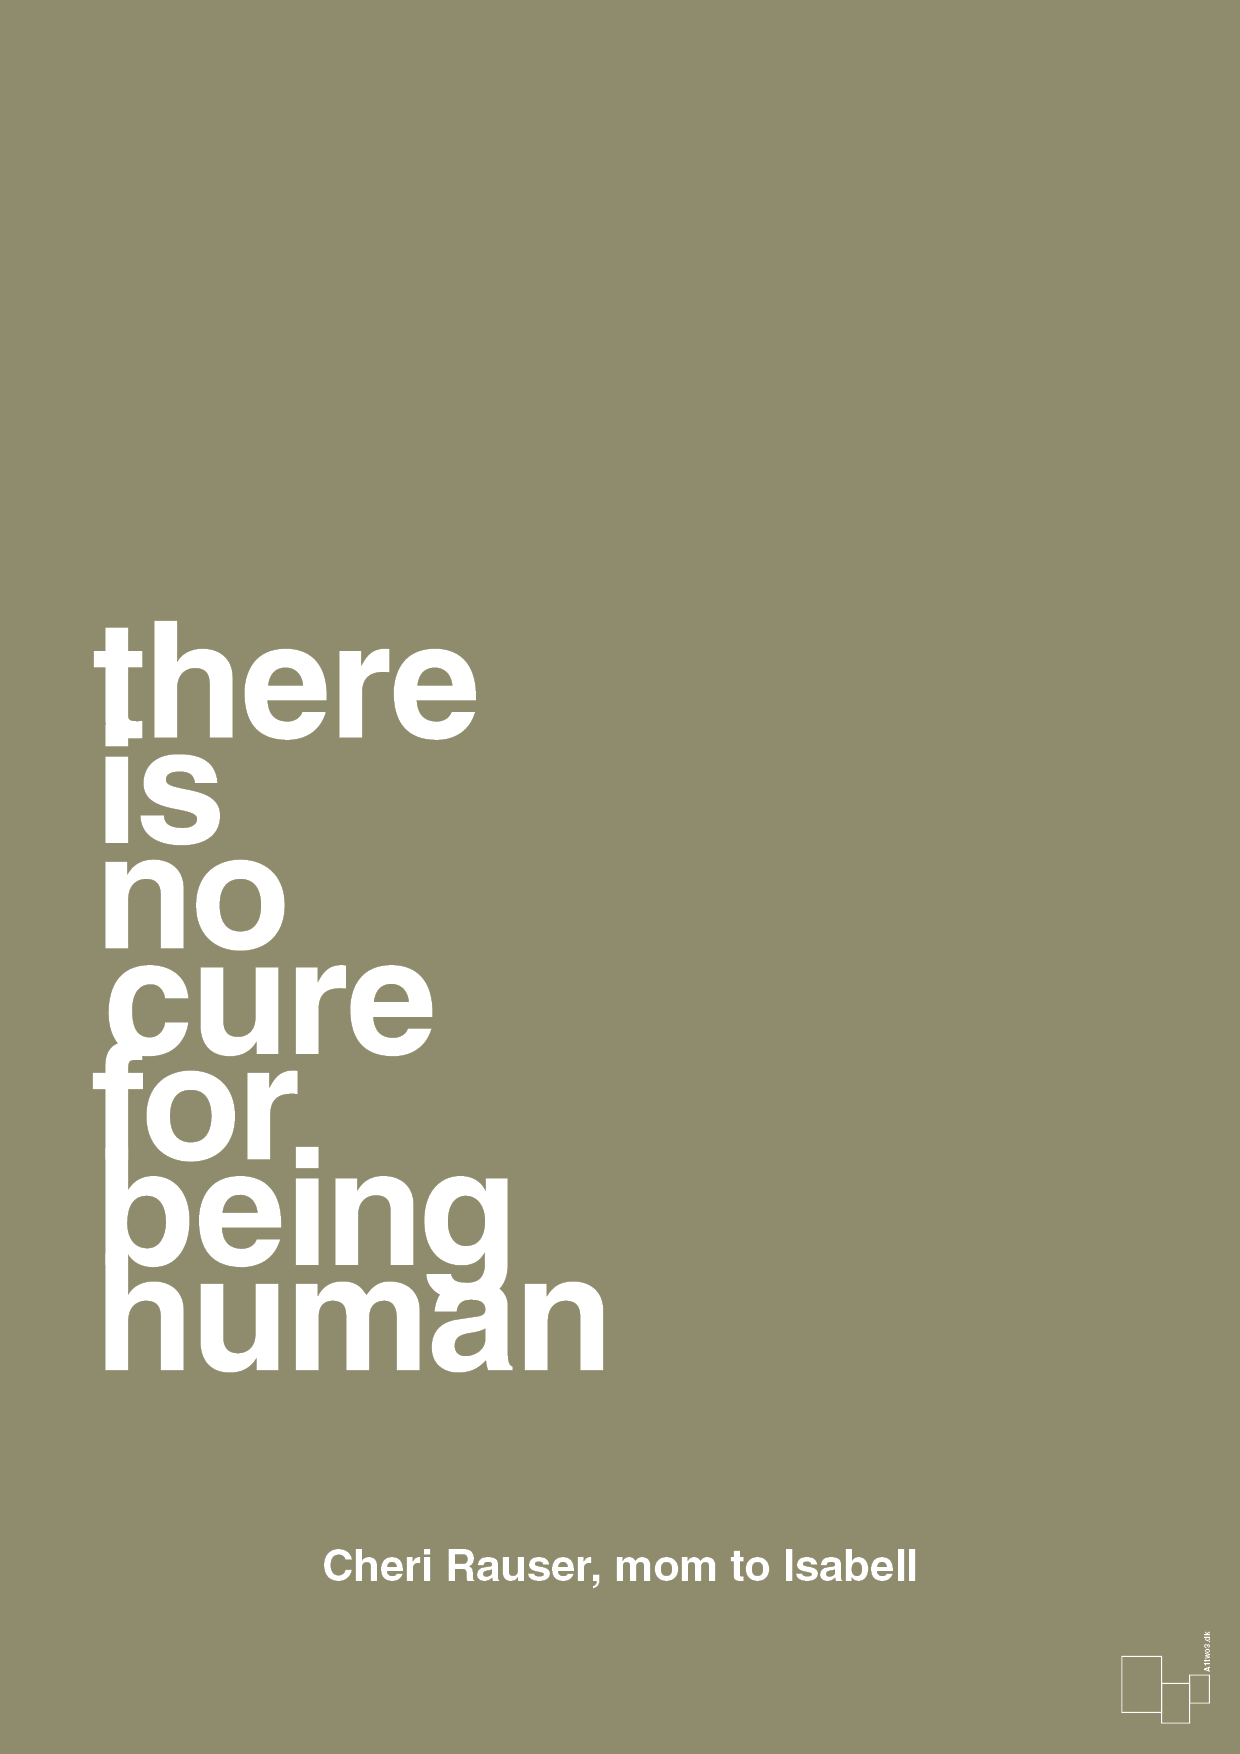 there is no cure for being human - Plakat med Samfund i Misty Forrest